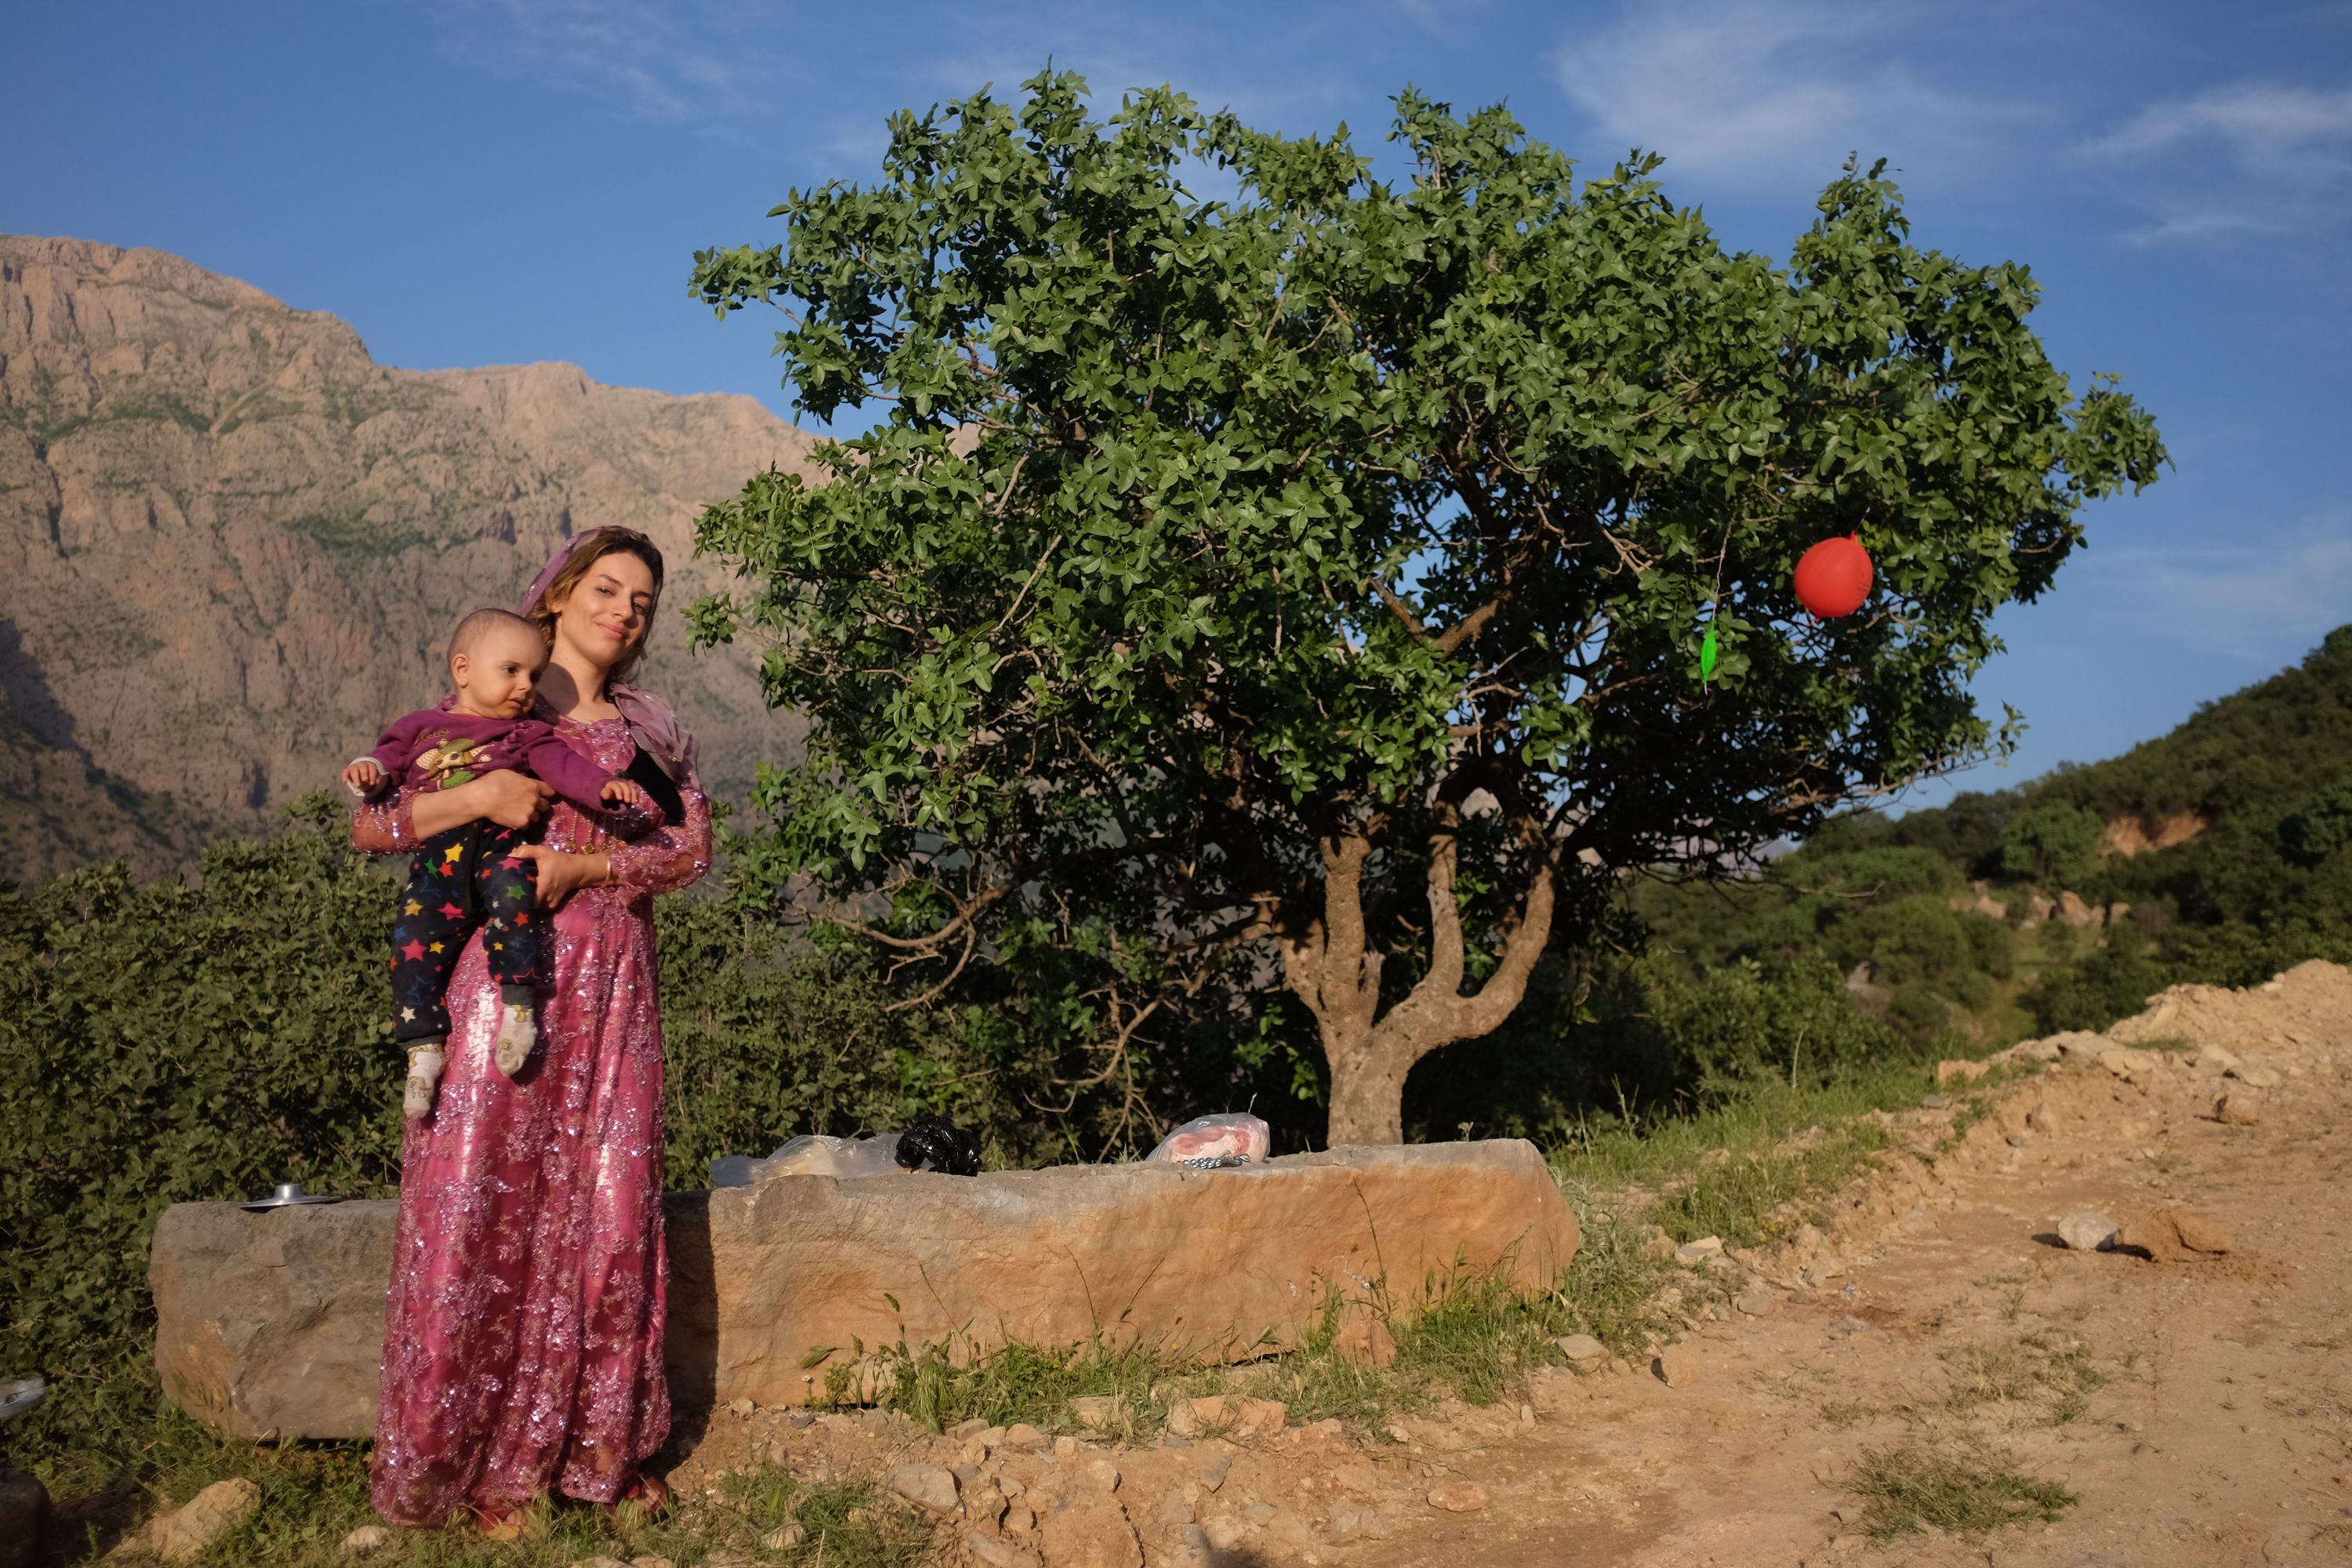 A young woman in an embroidered pink dress holds a baby in front of a large tree with a red balloon in its branches.